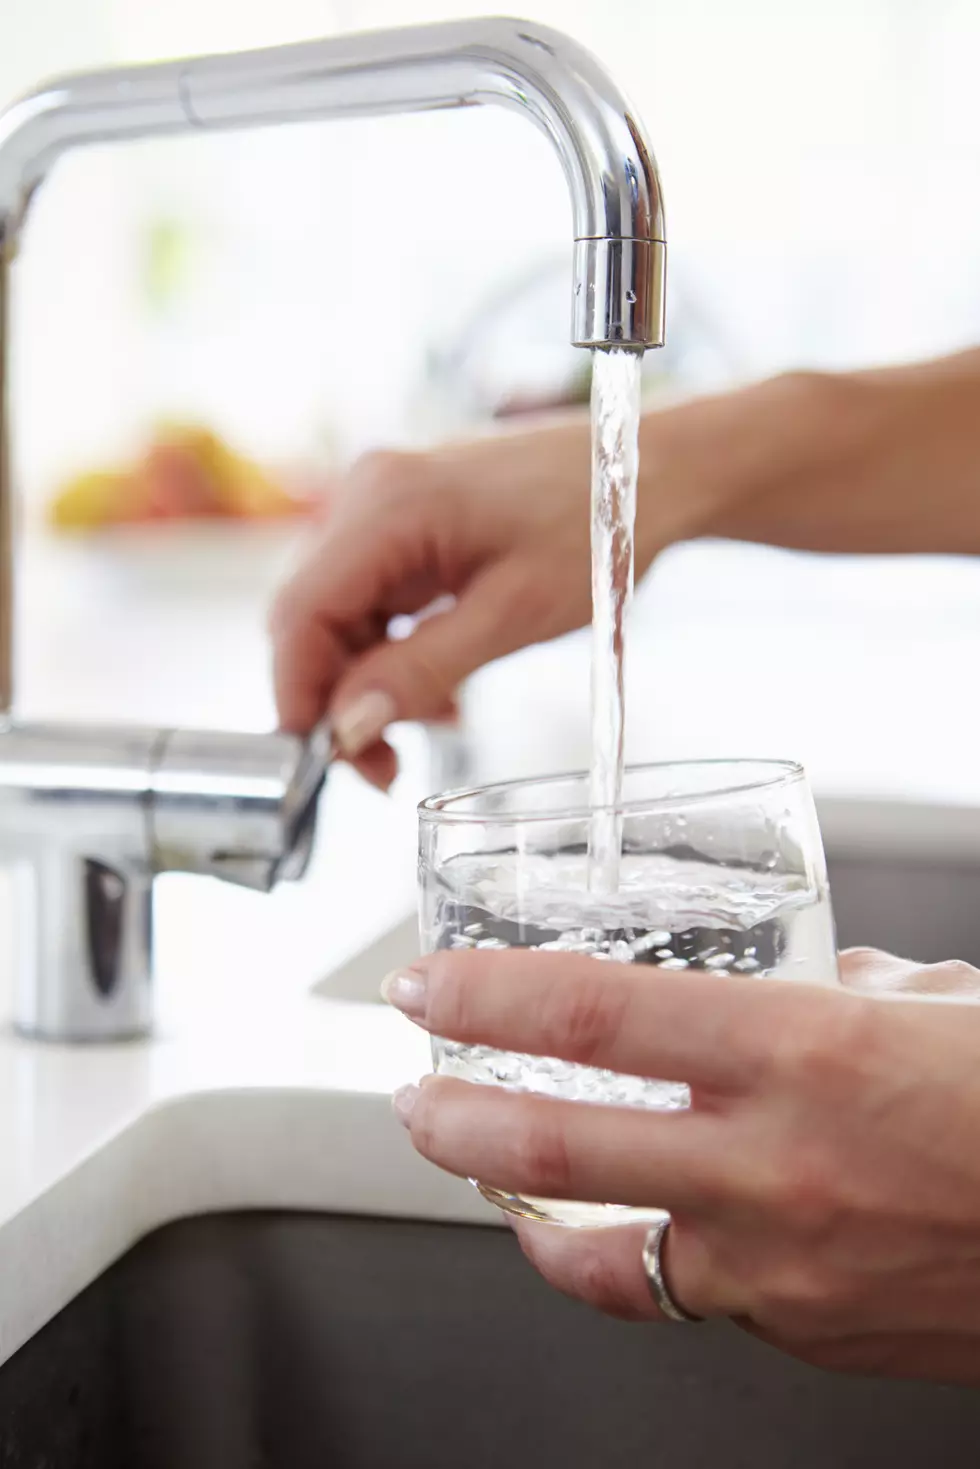 Lead Testing In NY Schools Drinking Water: Results Are In for Voorheesville